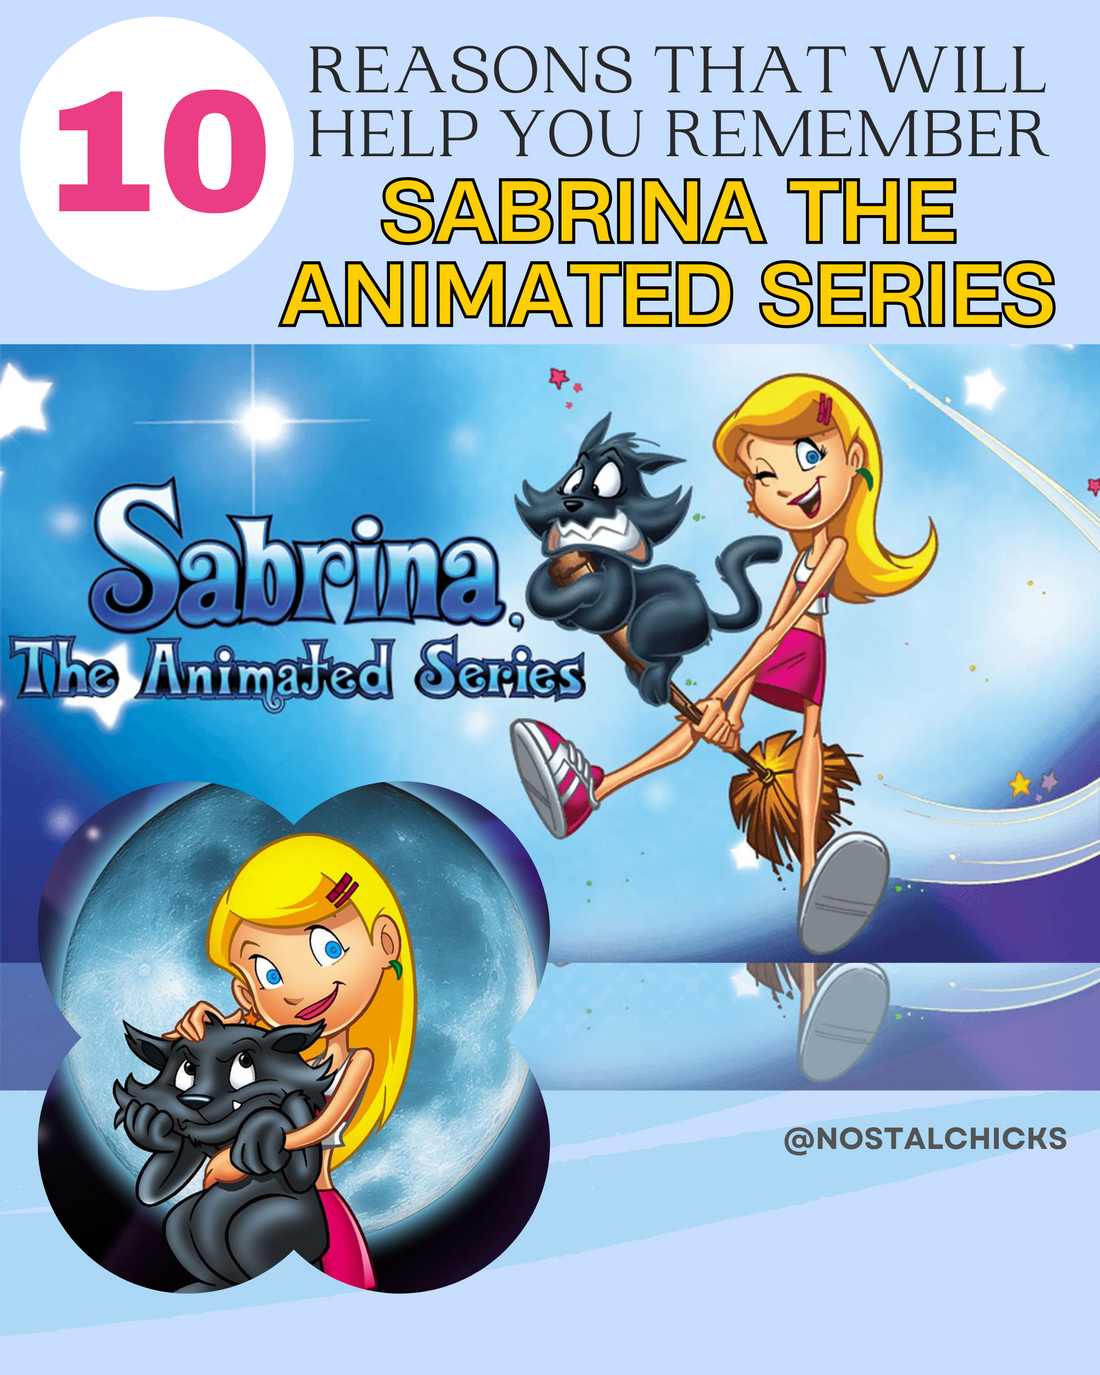 10 REASONS THAT WILL HELP YOU REMEMBER SABRINA THE ANIMATED SERIES